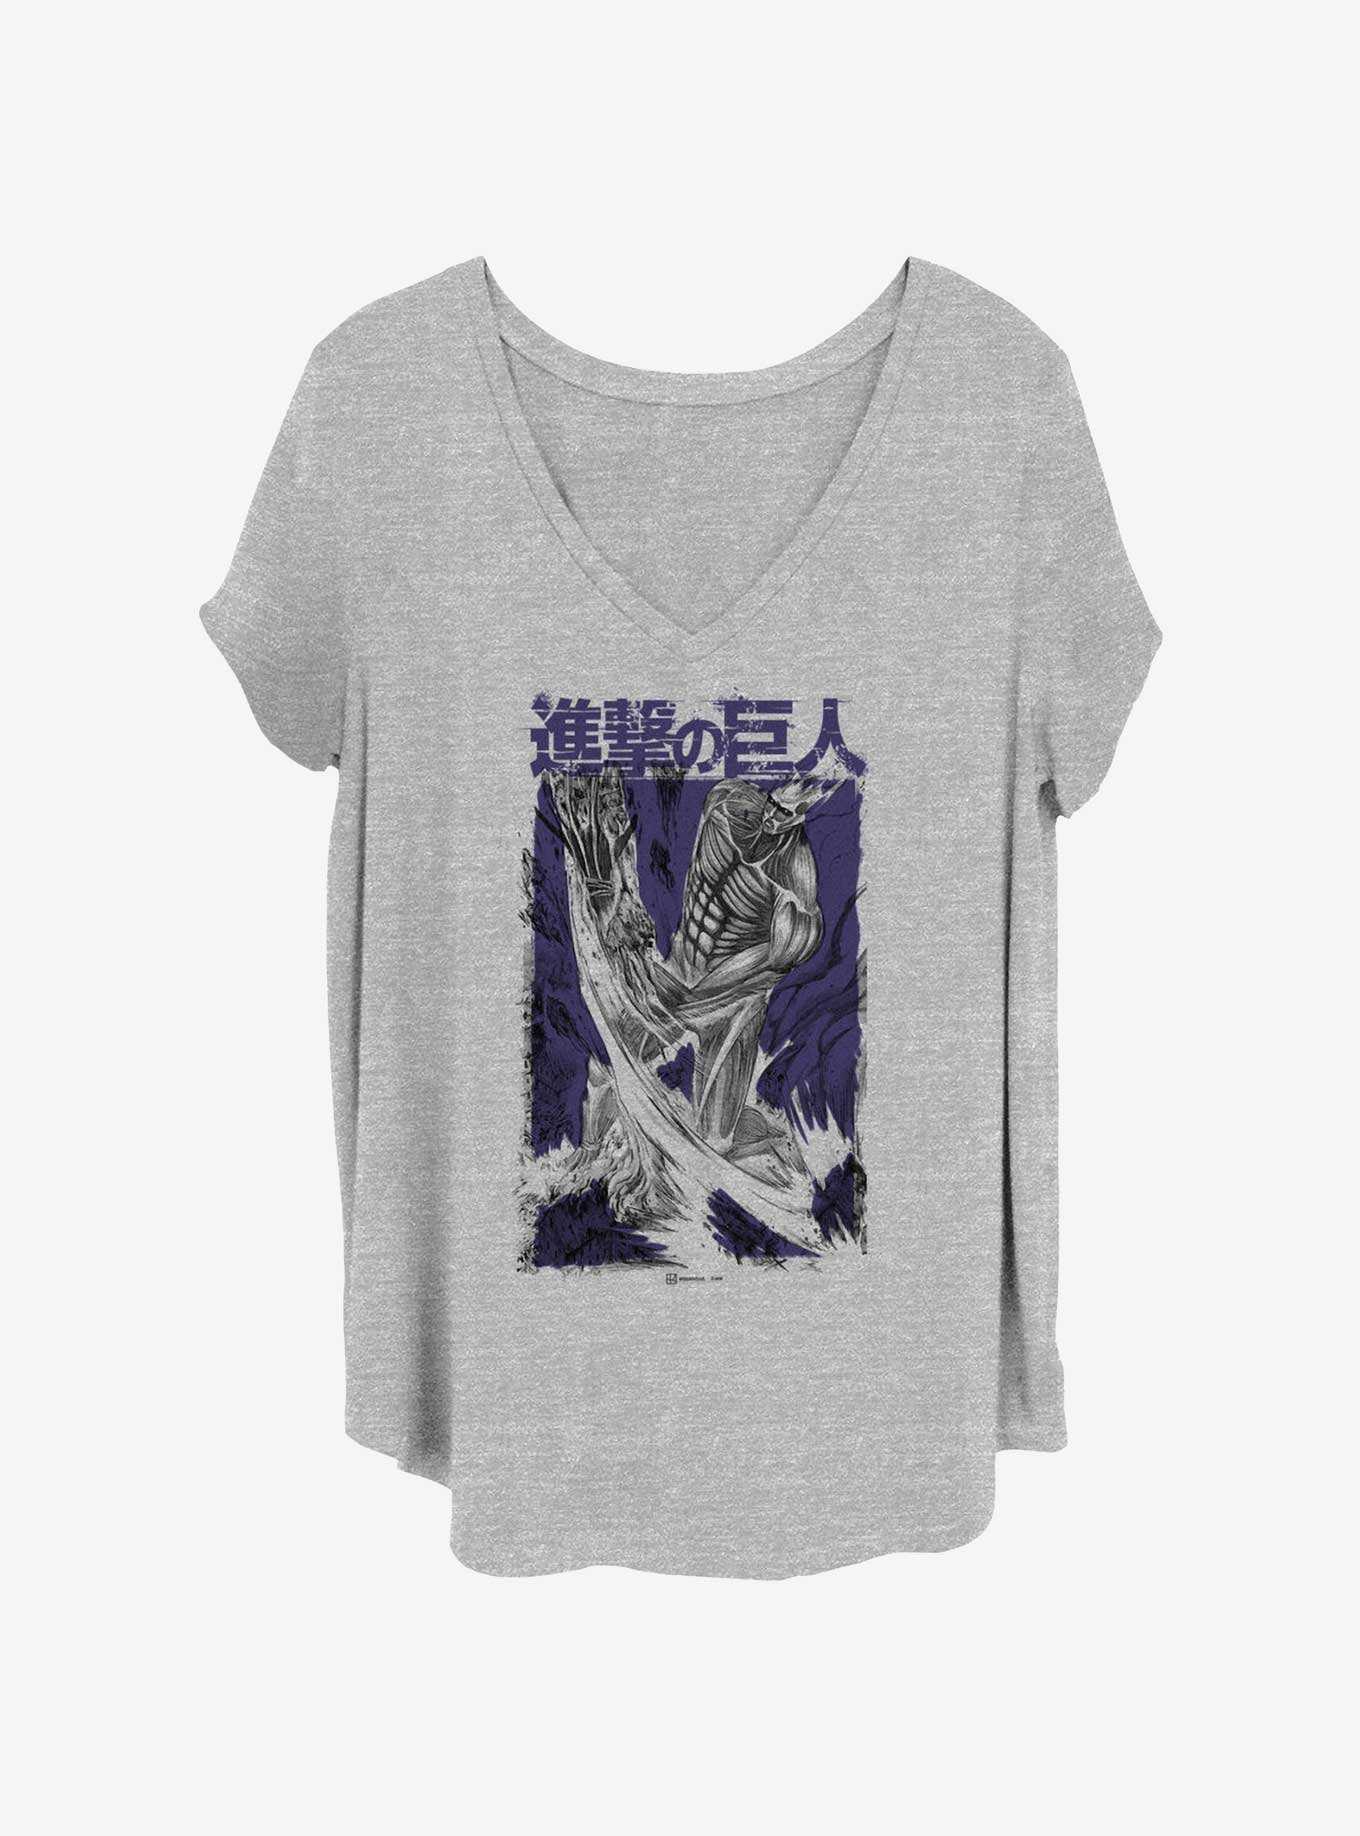 Attack on Titan Overlay Colossus Girls T-Shirt Plus Size, , hi-res